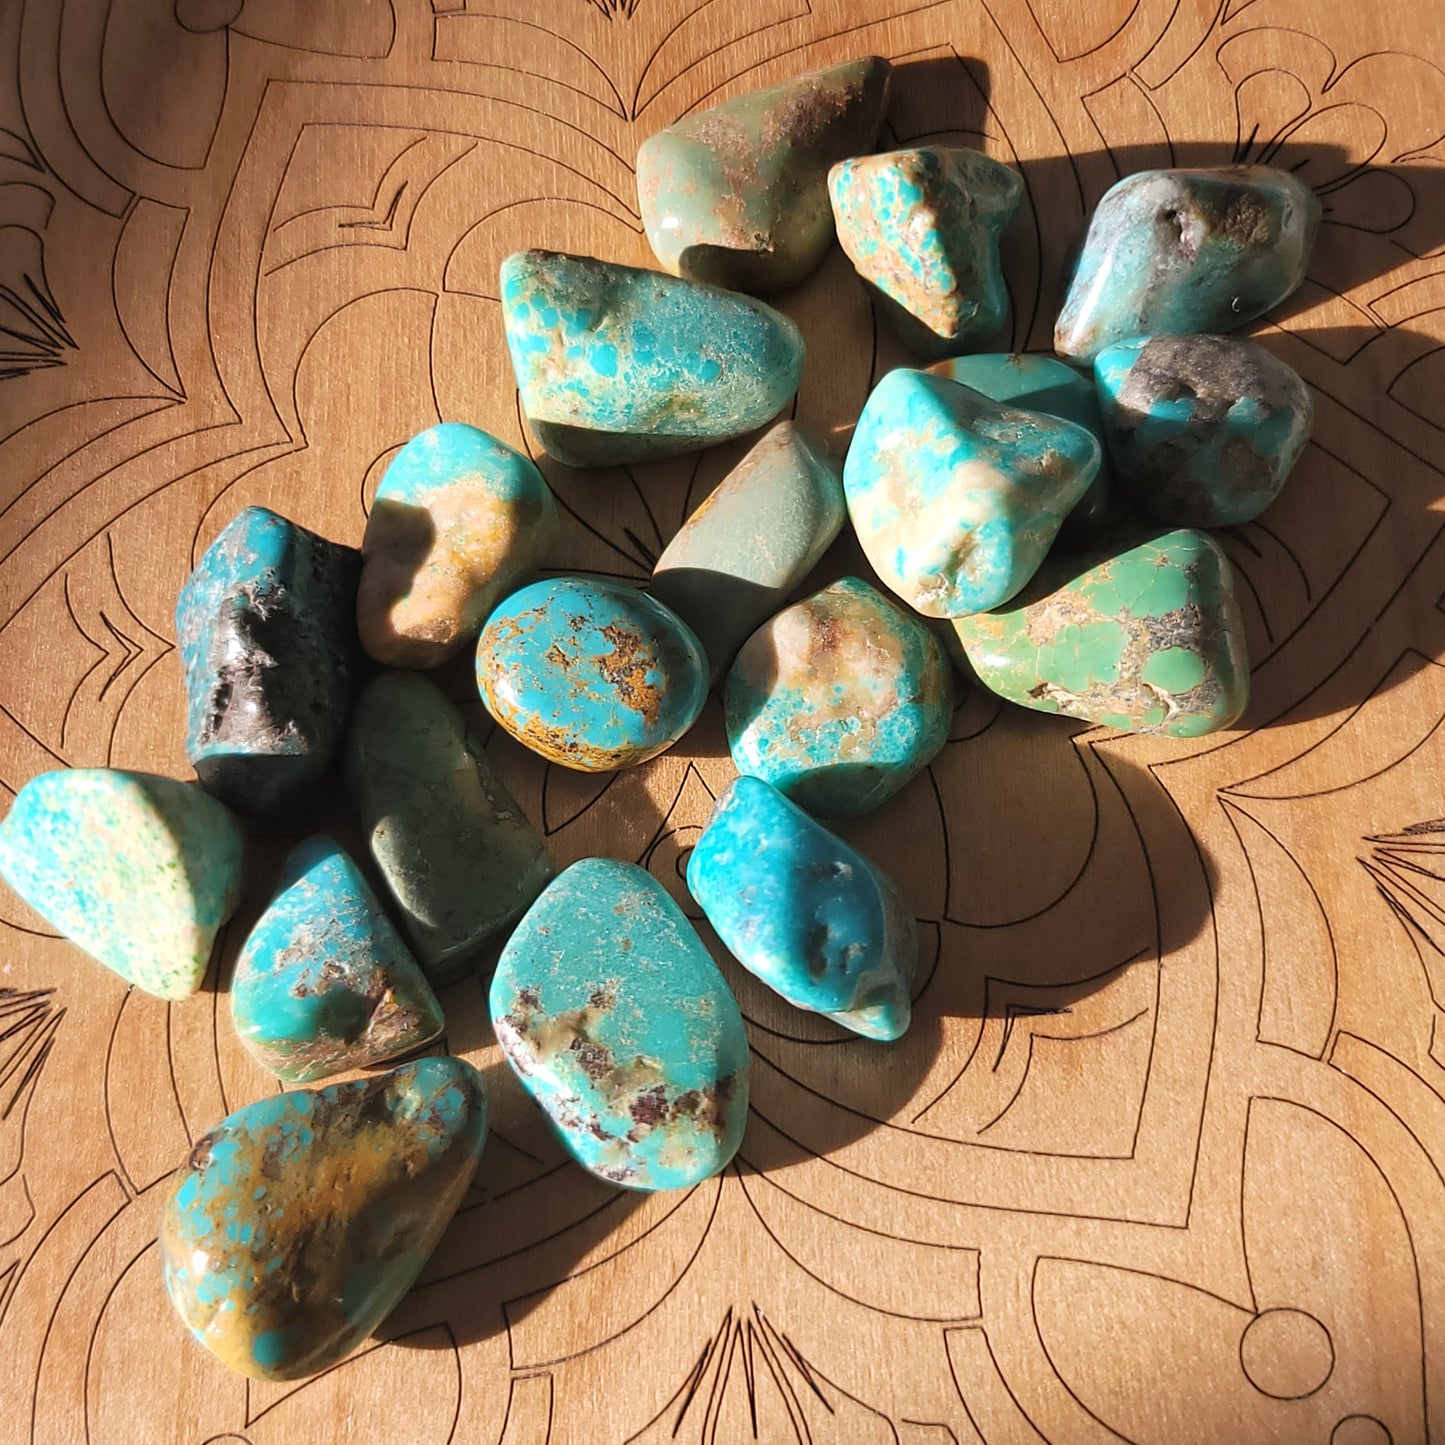 Turquoise || protection, strengthening, calming